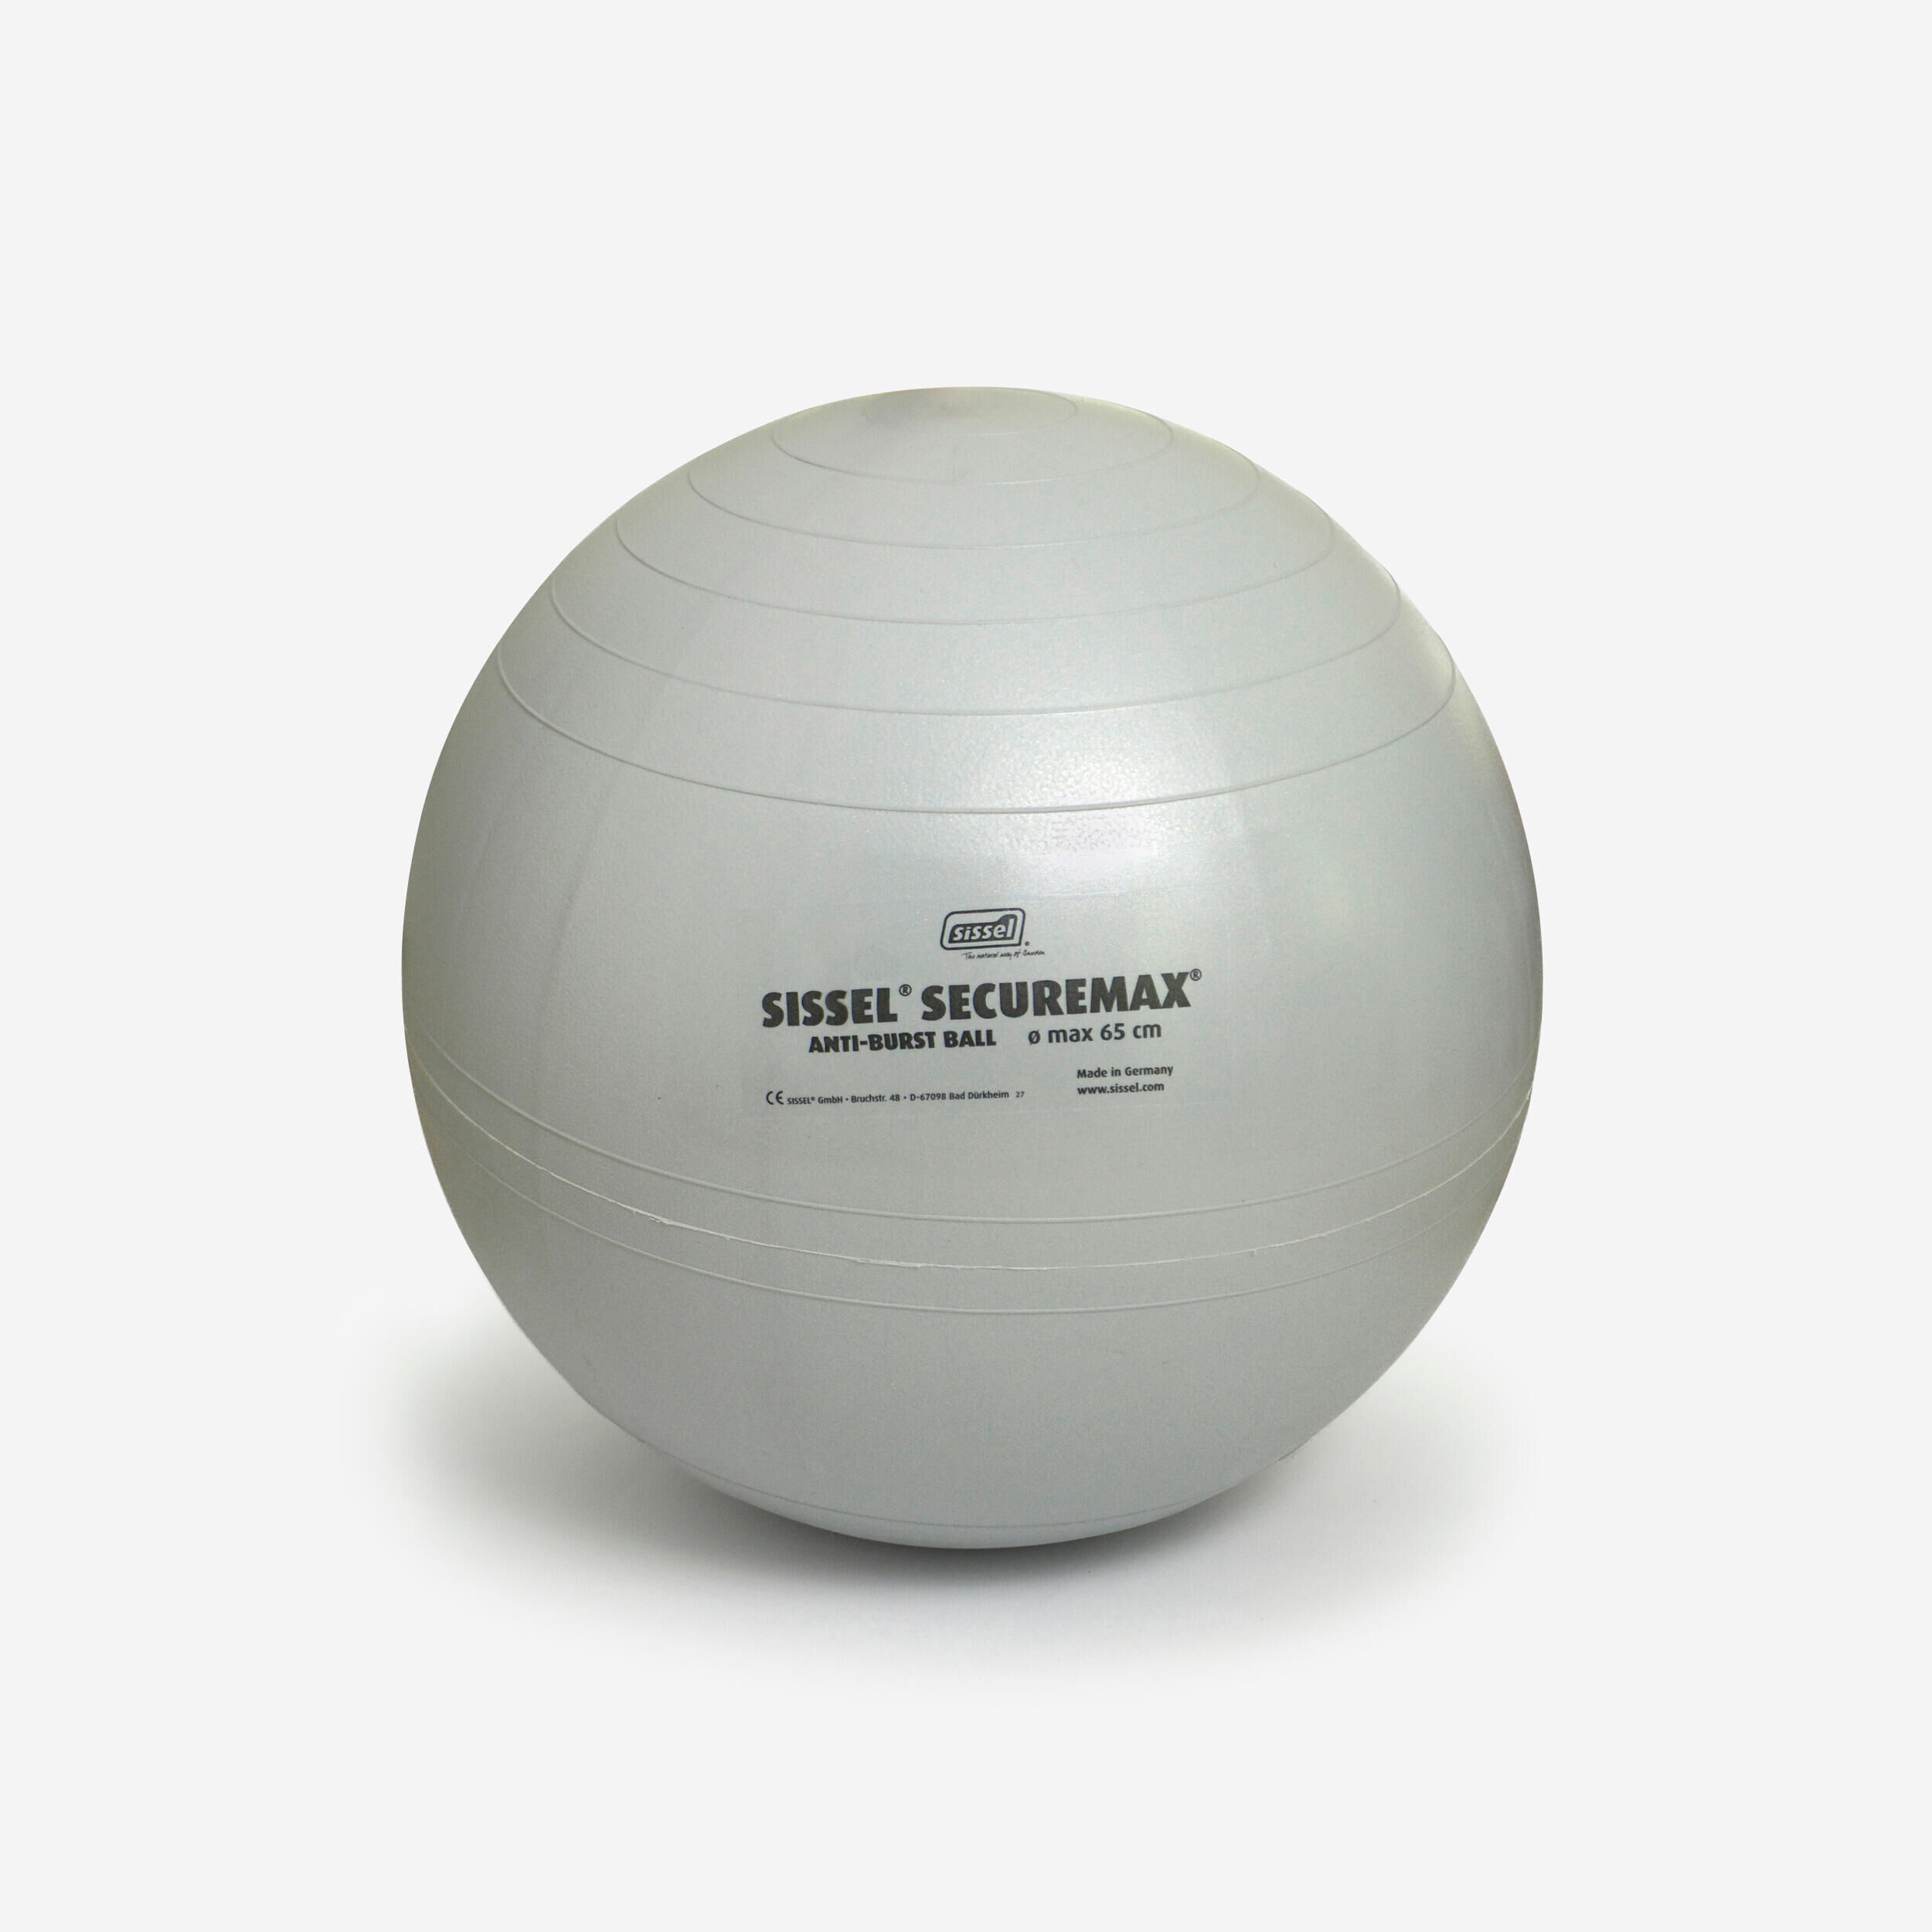 SISSEL Gym Ball Secure Max Fitness Size 2 65 cm - Grey